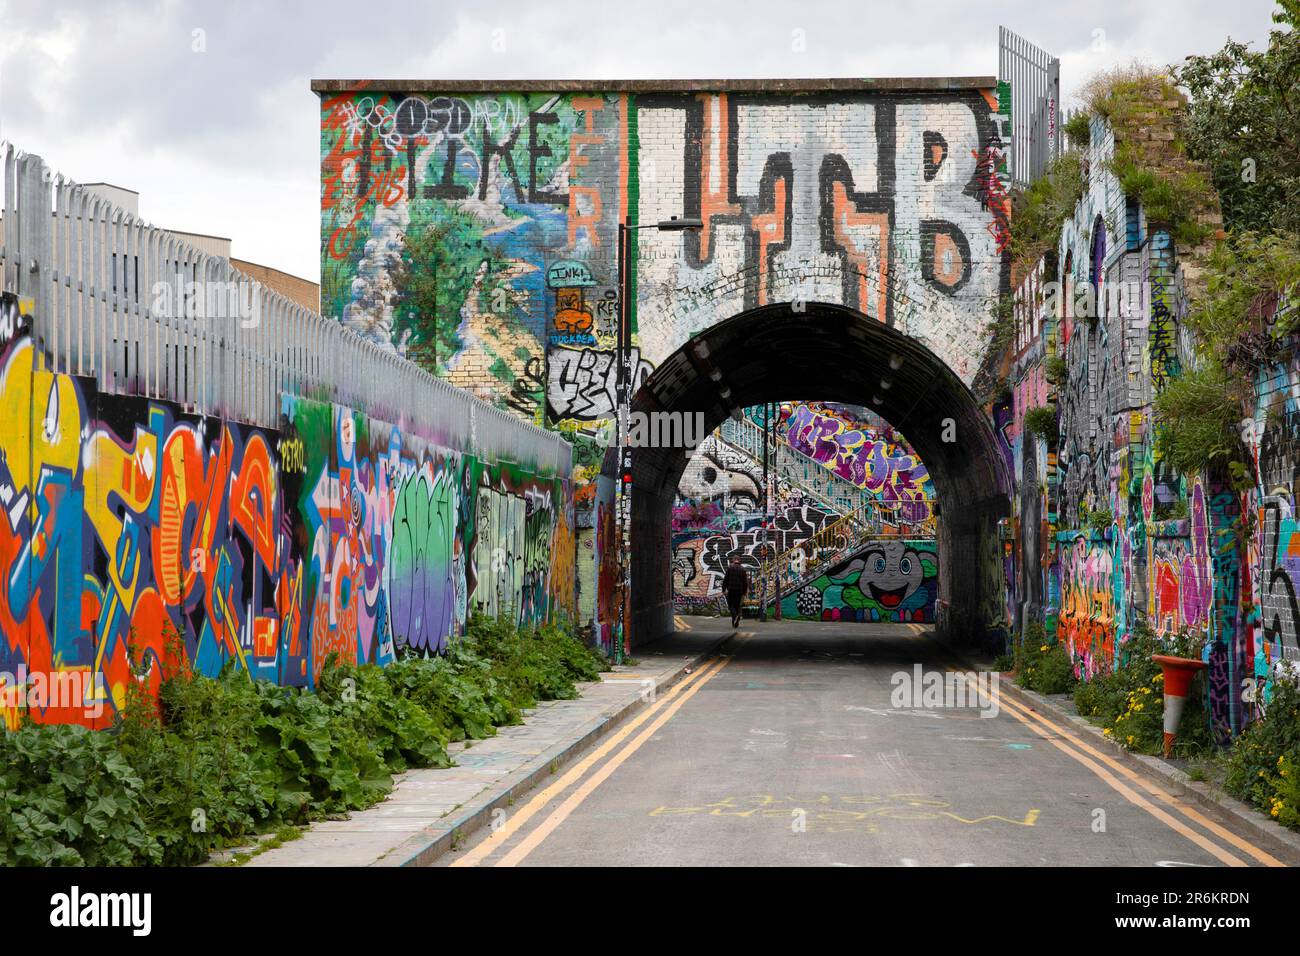 London, UK - May 17 2023: Looking towards a railway bridge in Shoreditch. The gritty inner city area is covered in graffiti. Stock Photo